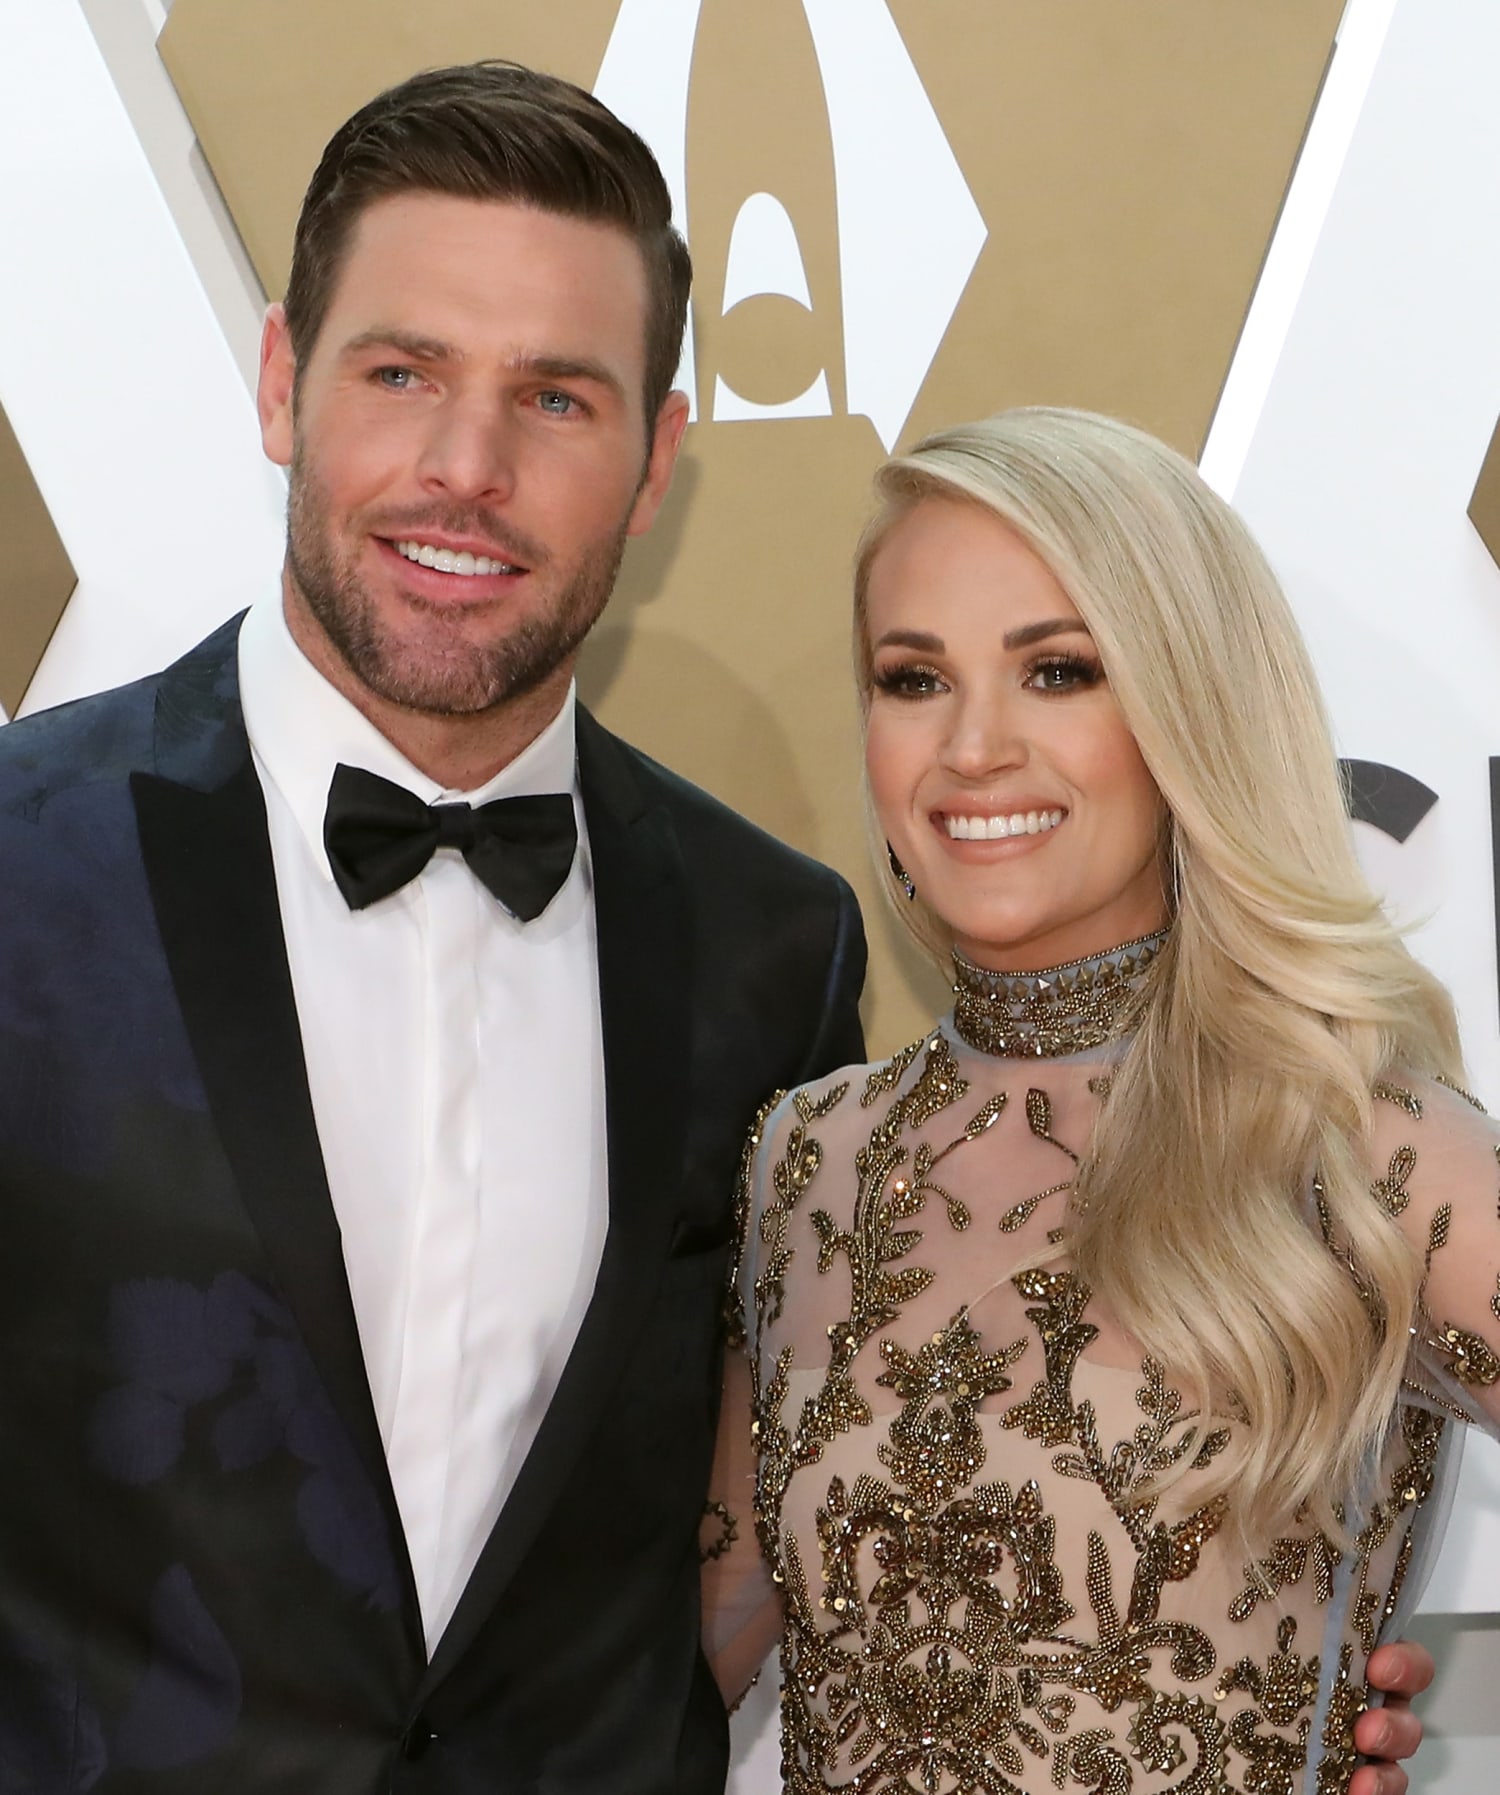 Carrie Underwood's husband shares joy over 'miracle baby' Jacob